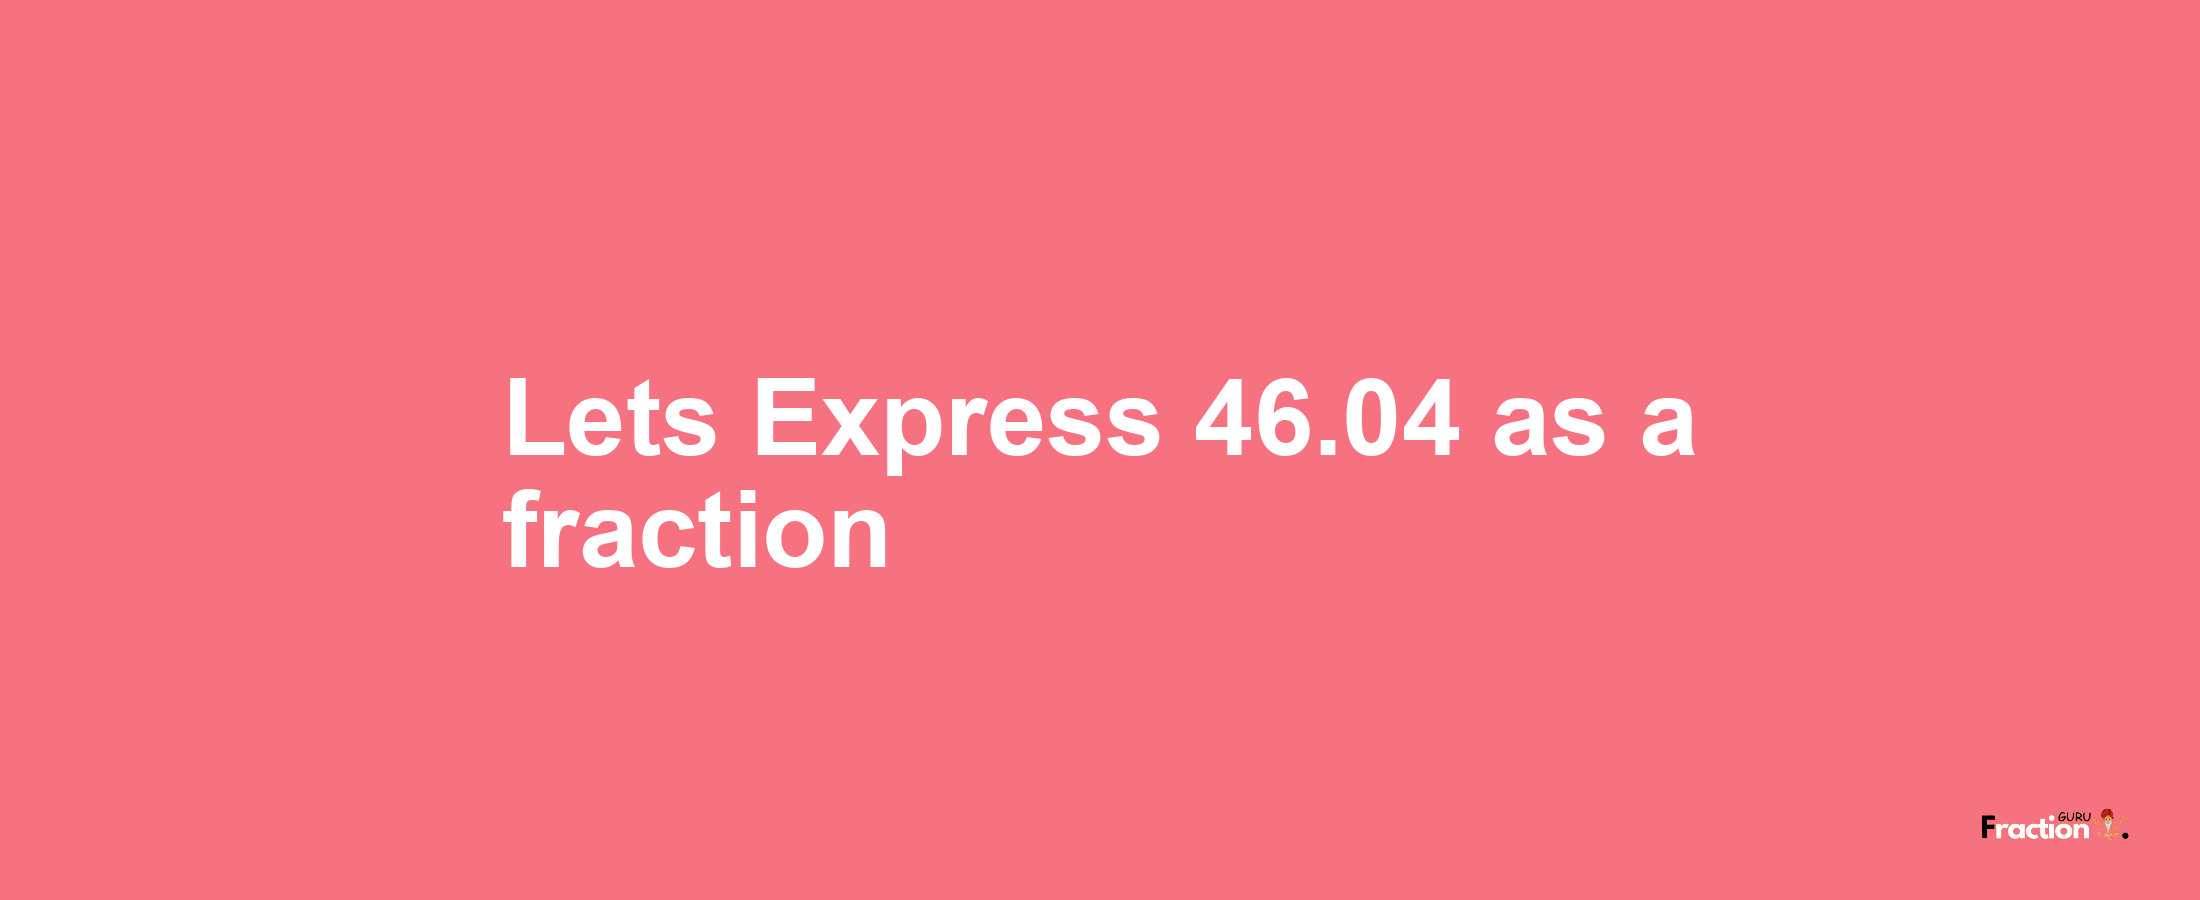 Lets Express 46.04 as afraction